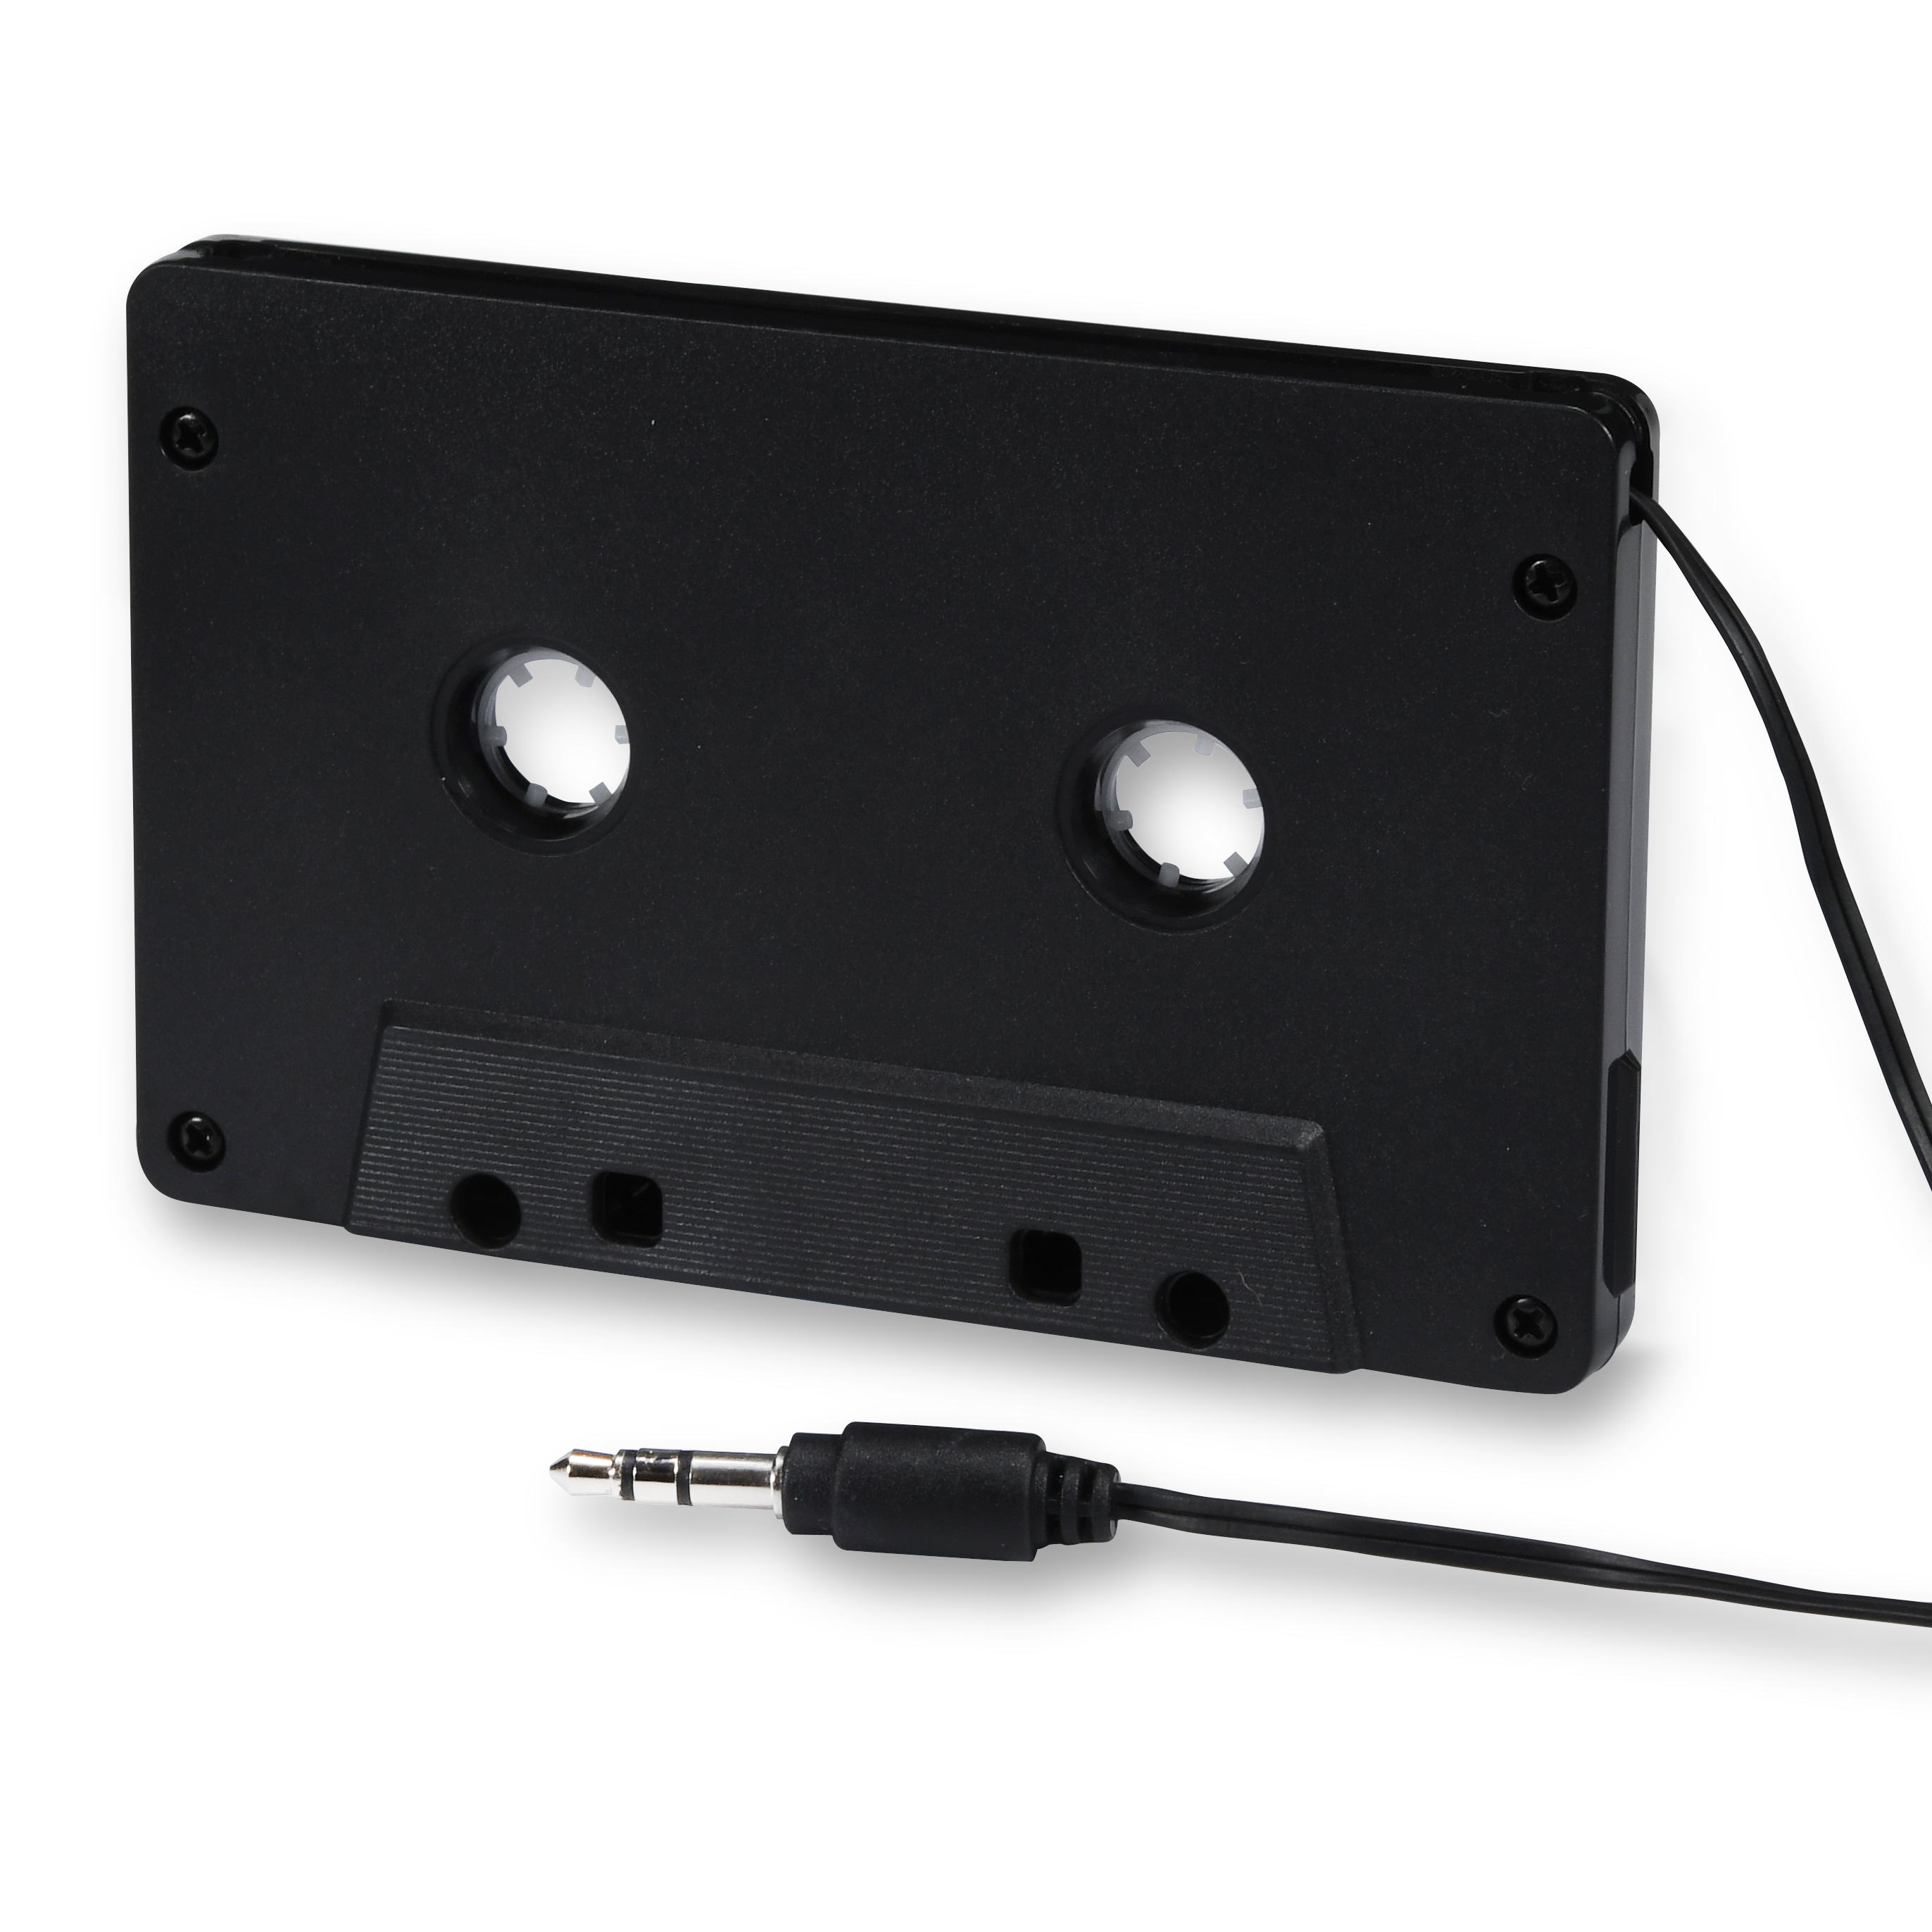 Onn Cassette Adapter - Turn Any Tapedeck Stereo System Into a Digital Media Player - image 1 of 5